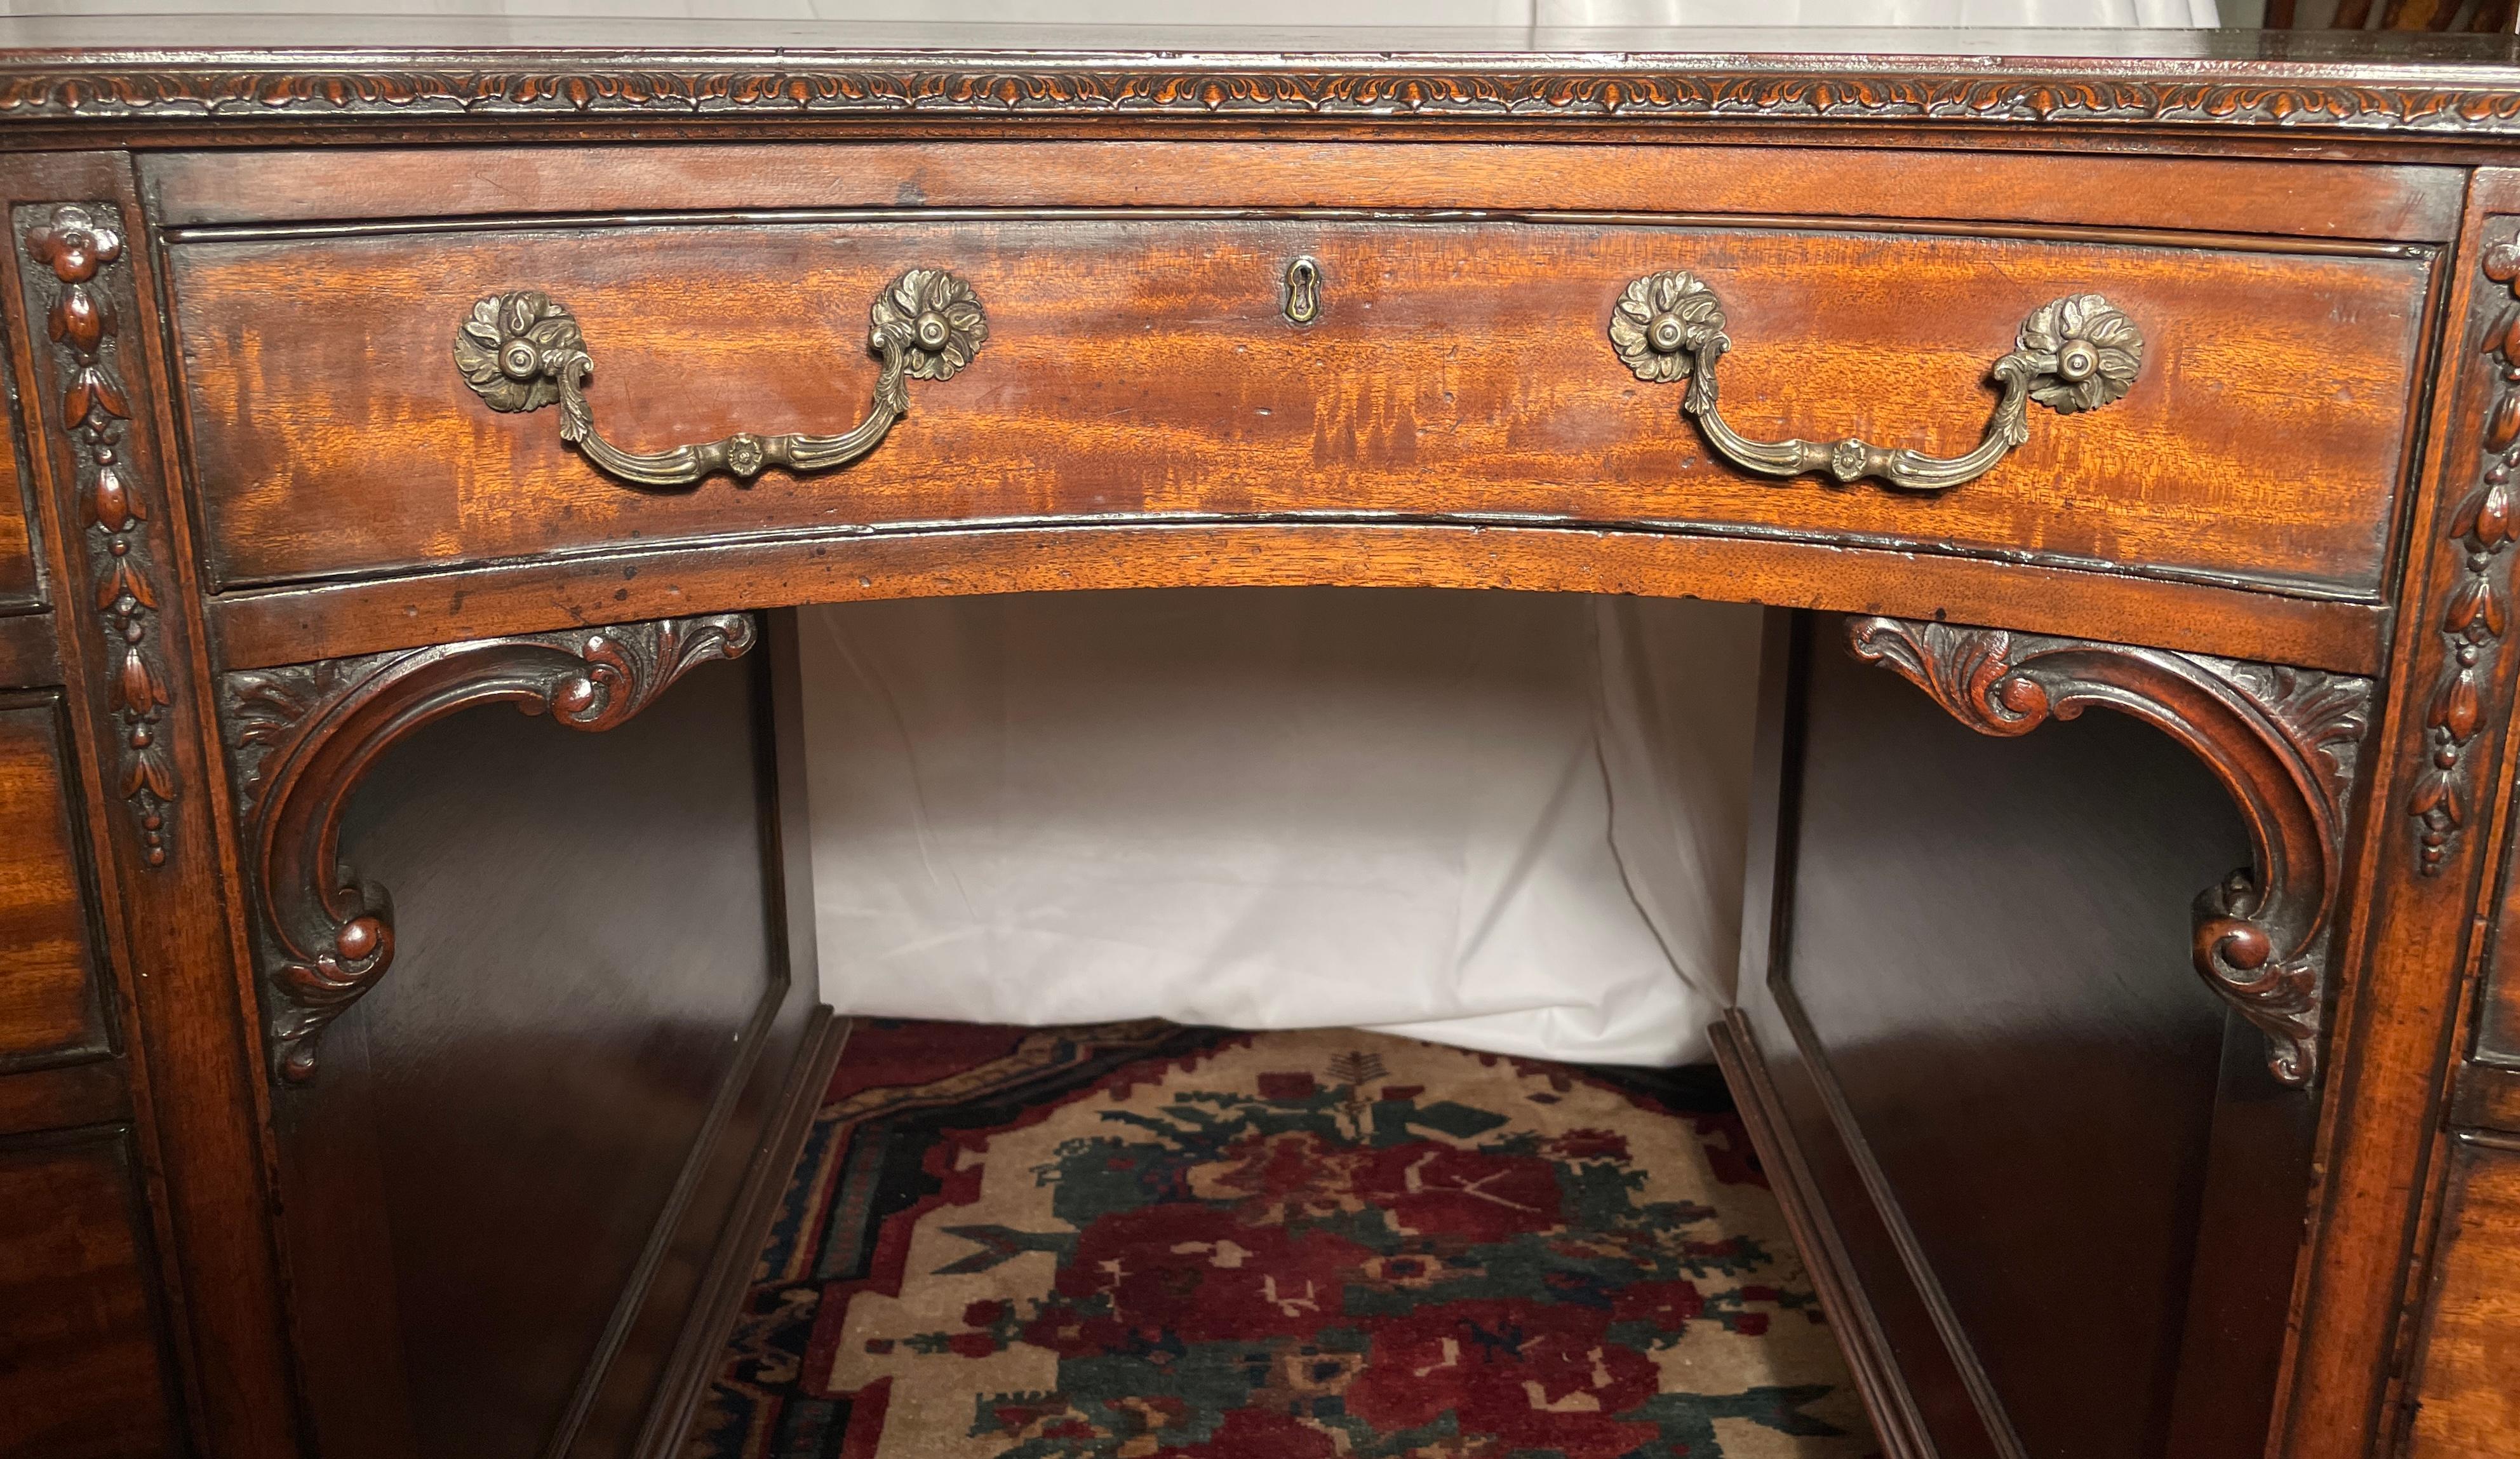 19th Century Antique English Chippendale Mahogany Kidney Shaped Leather-Top Desk, Circa 1880